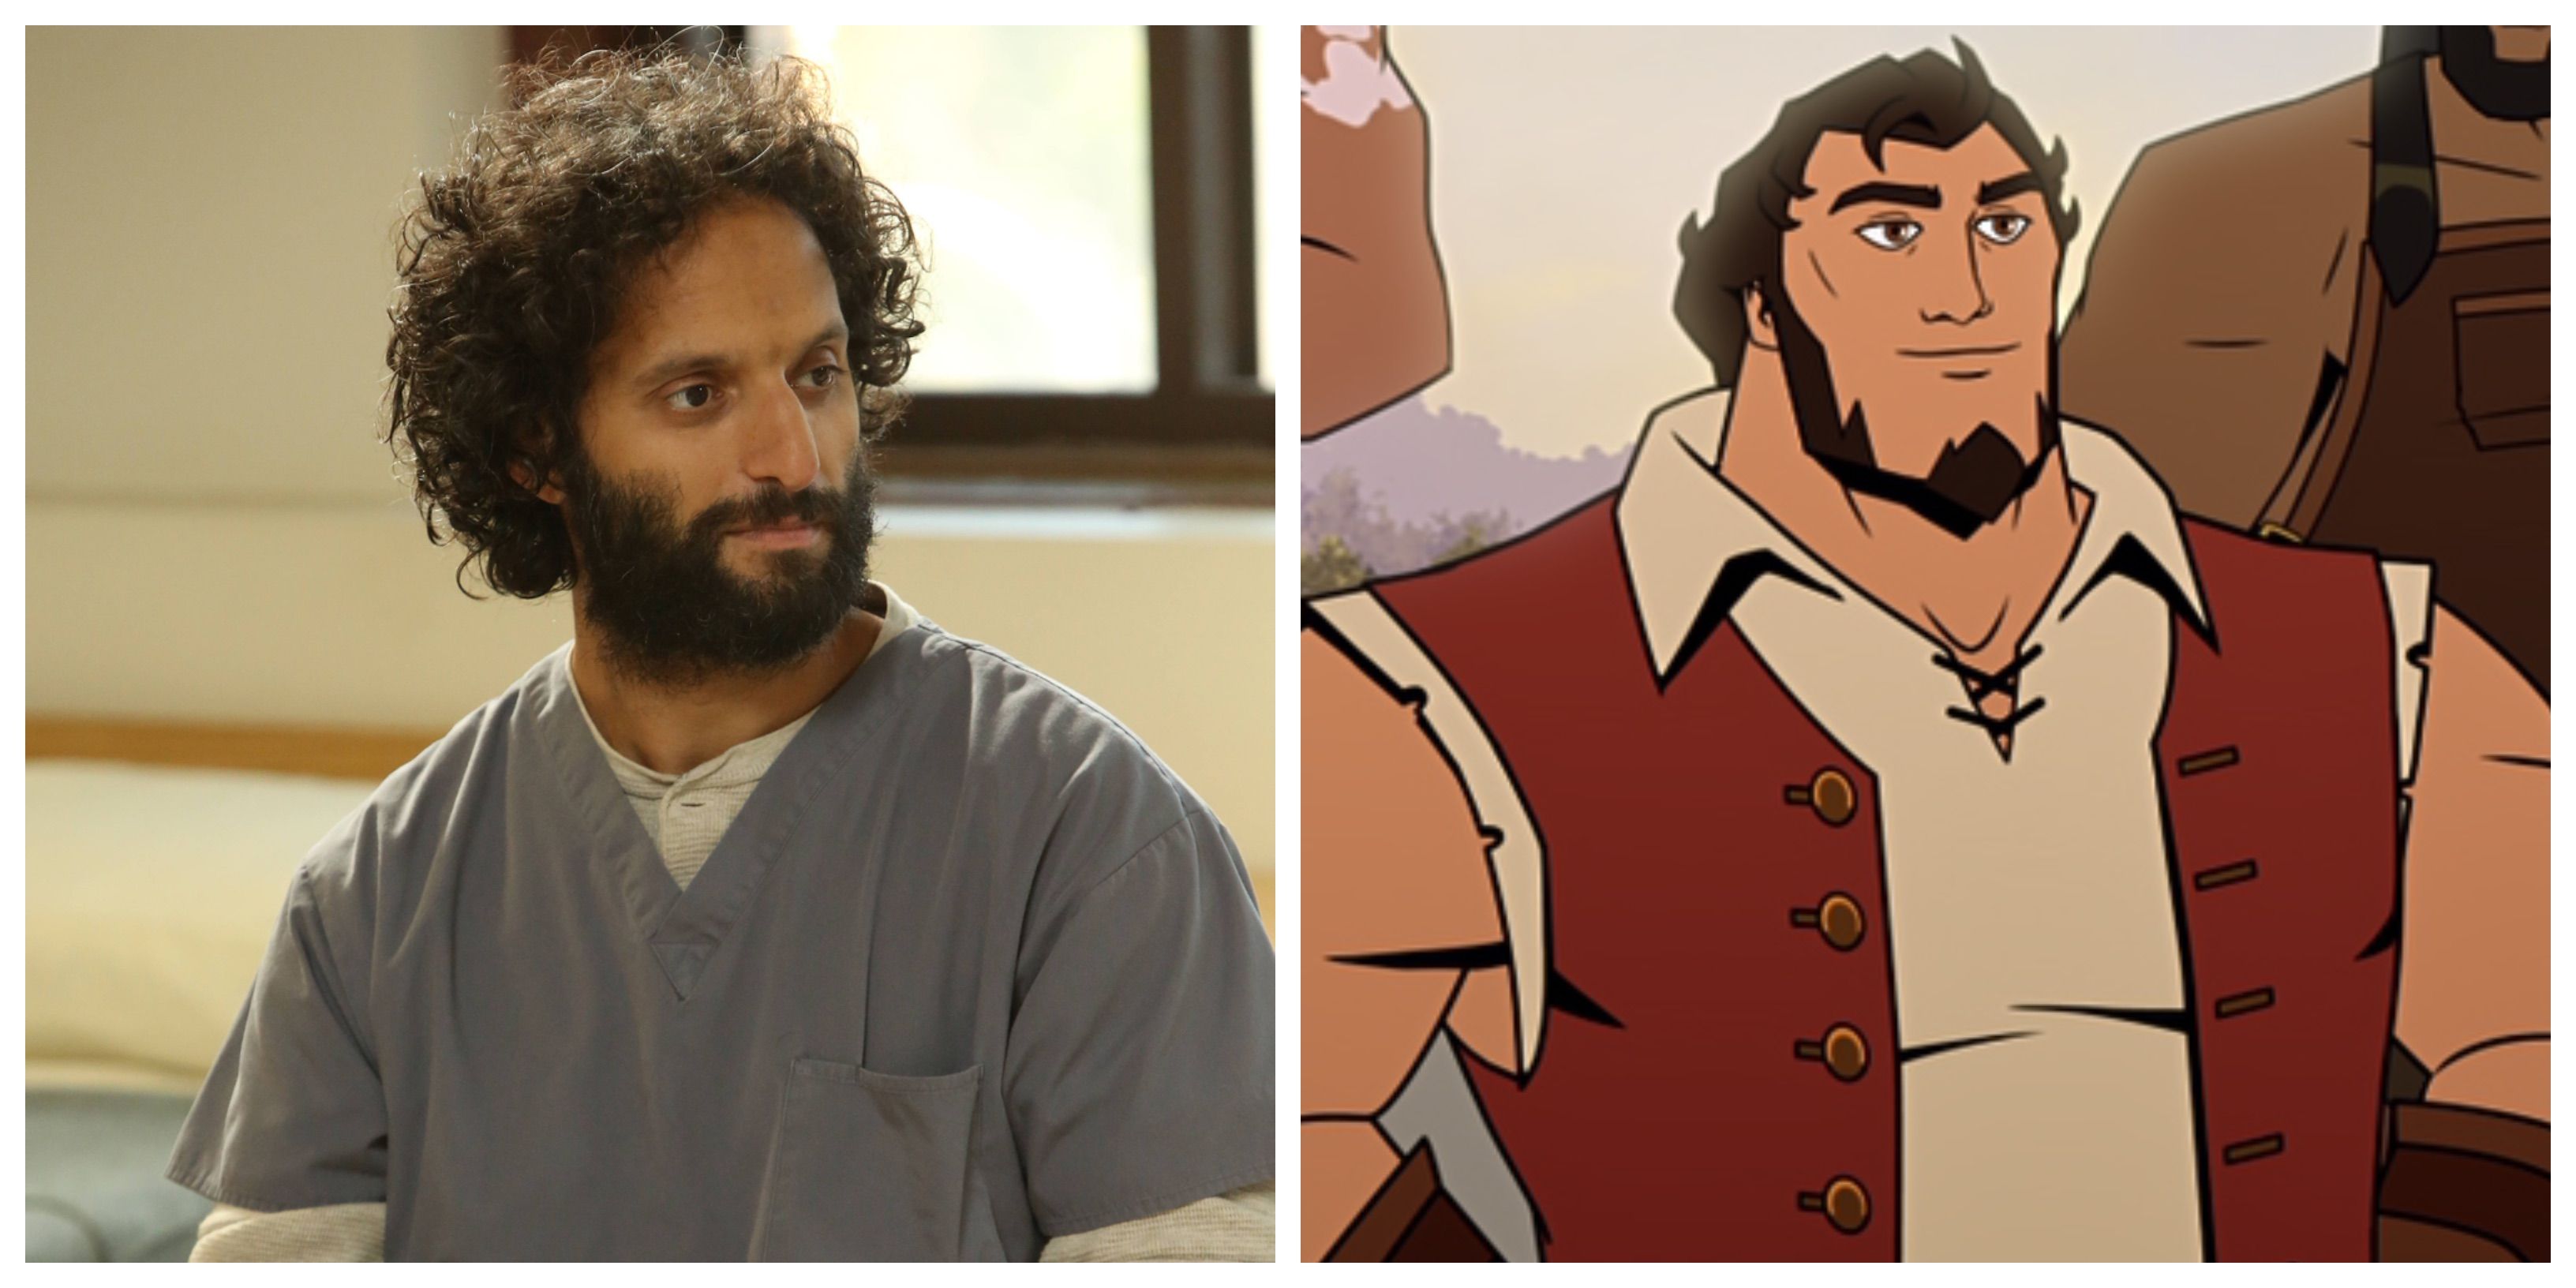 Jason Mantzoukas as Sam Adams in America: The Motion Picture on Netflix